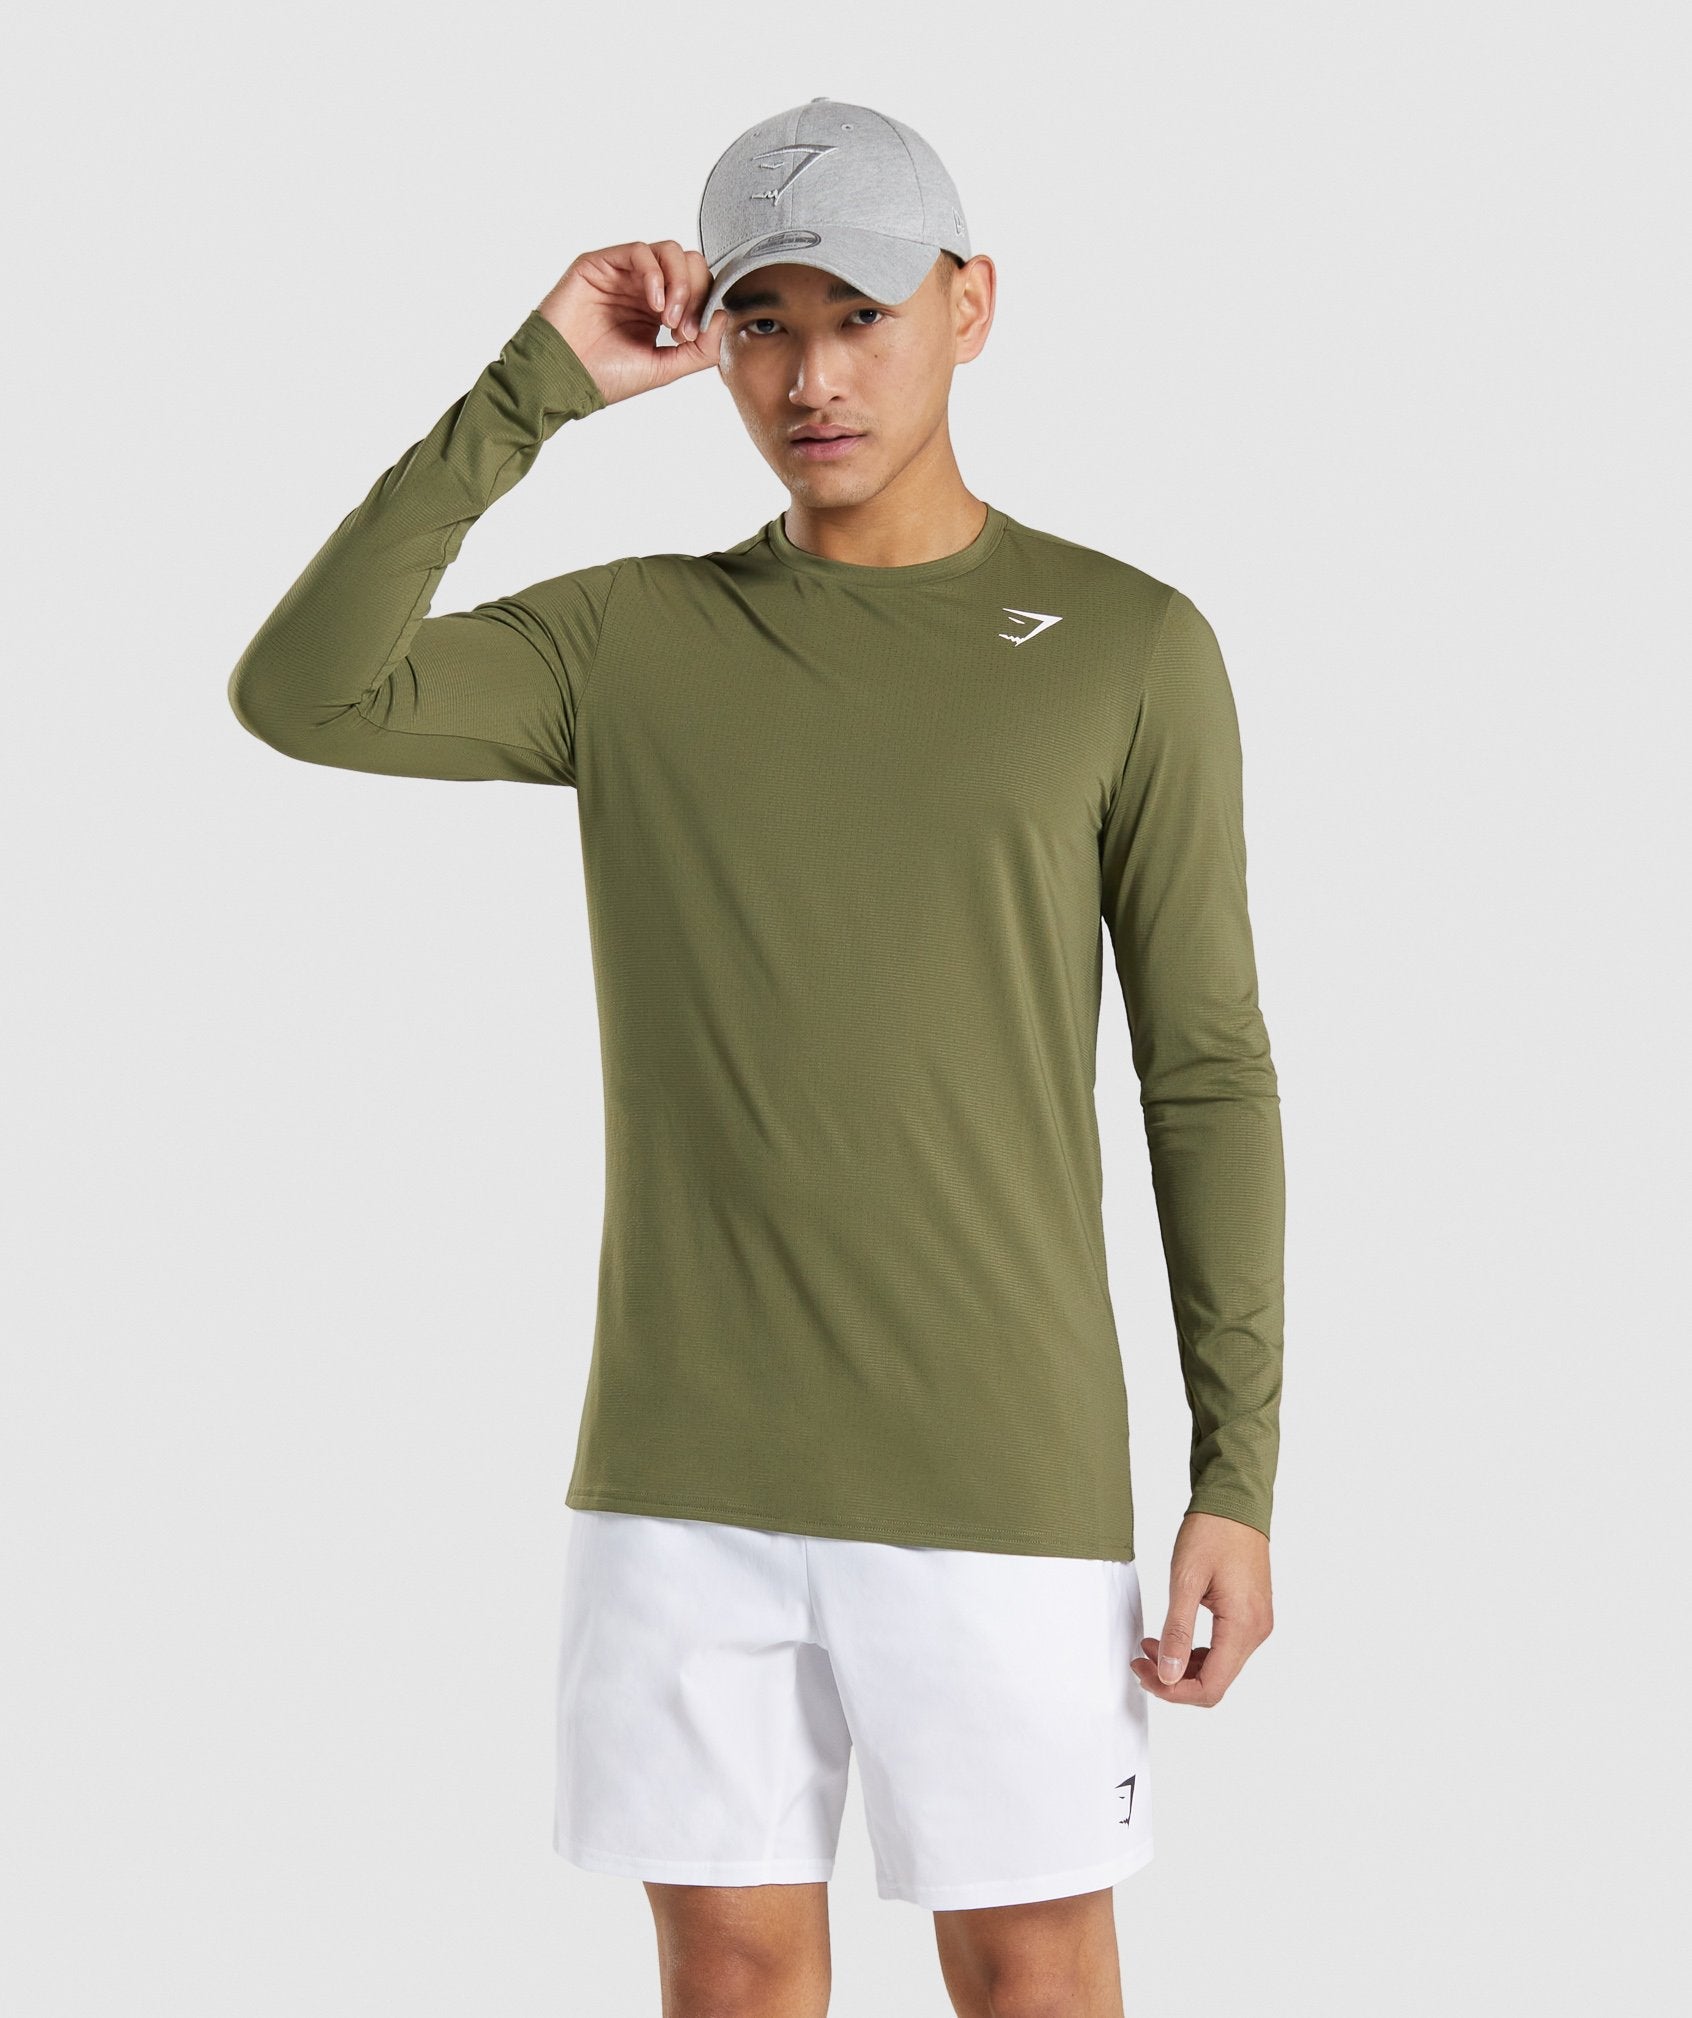 Arrival Long Sleeve T-Shirt in Dark Green - view 1